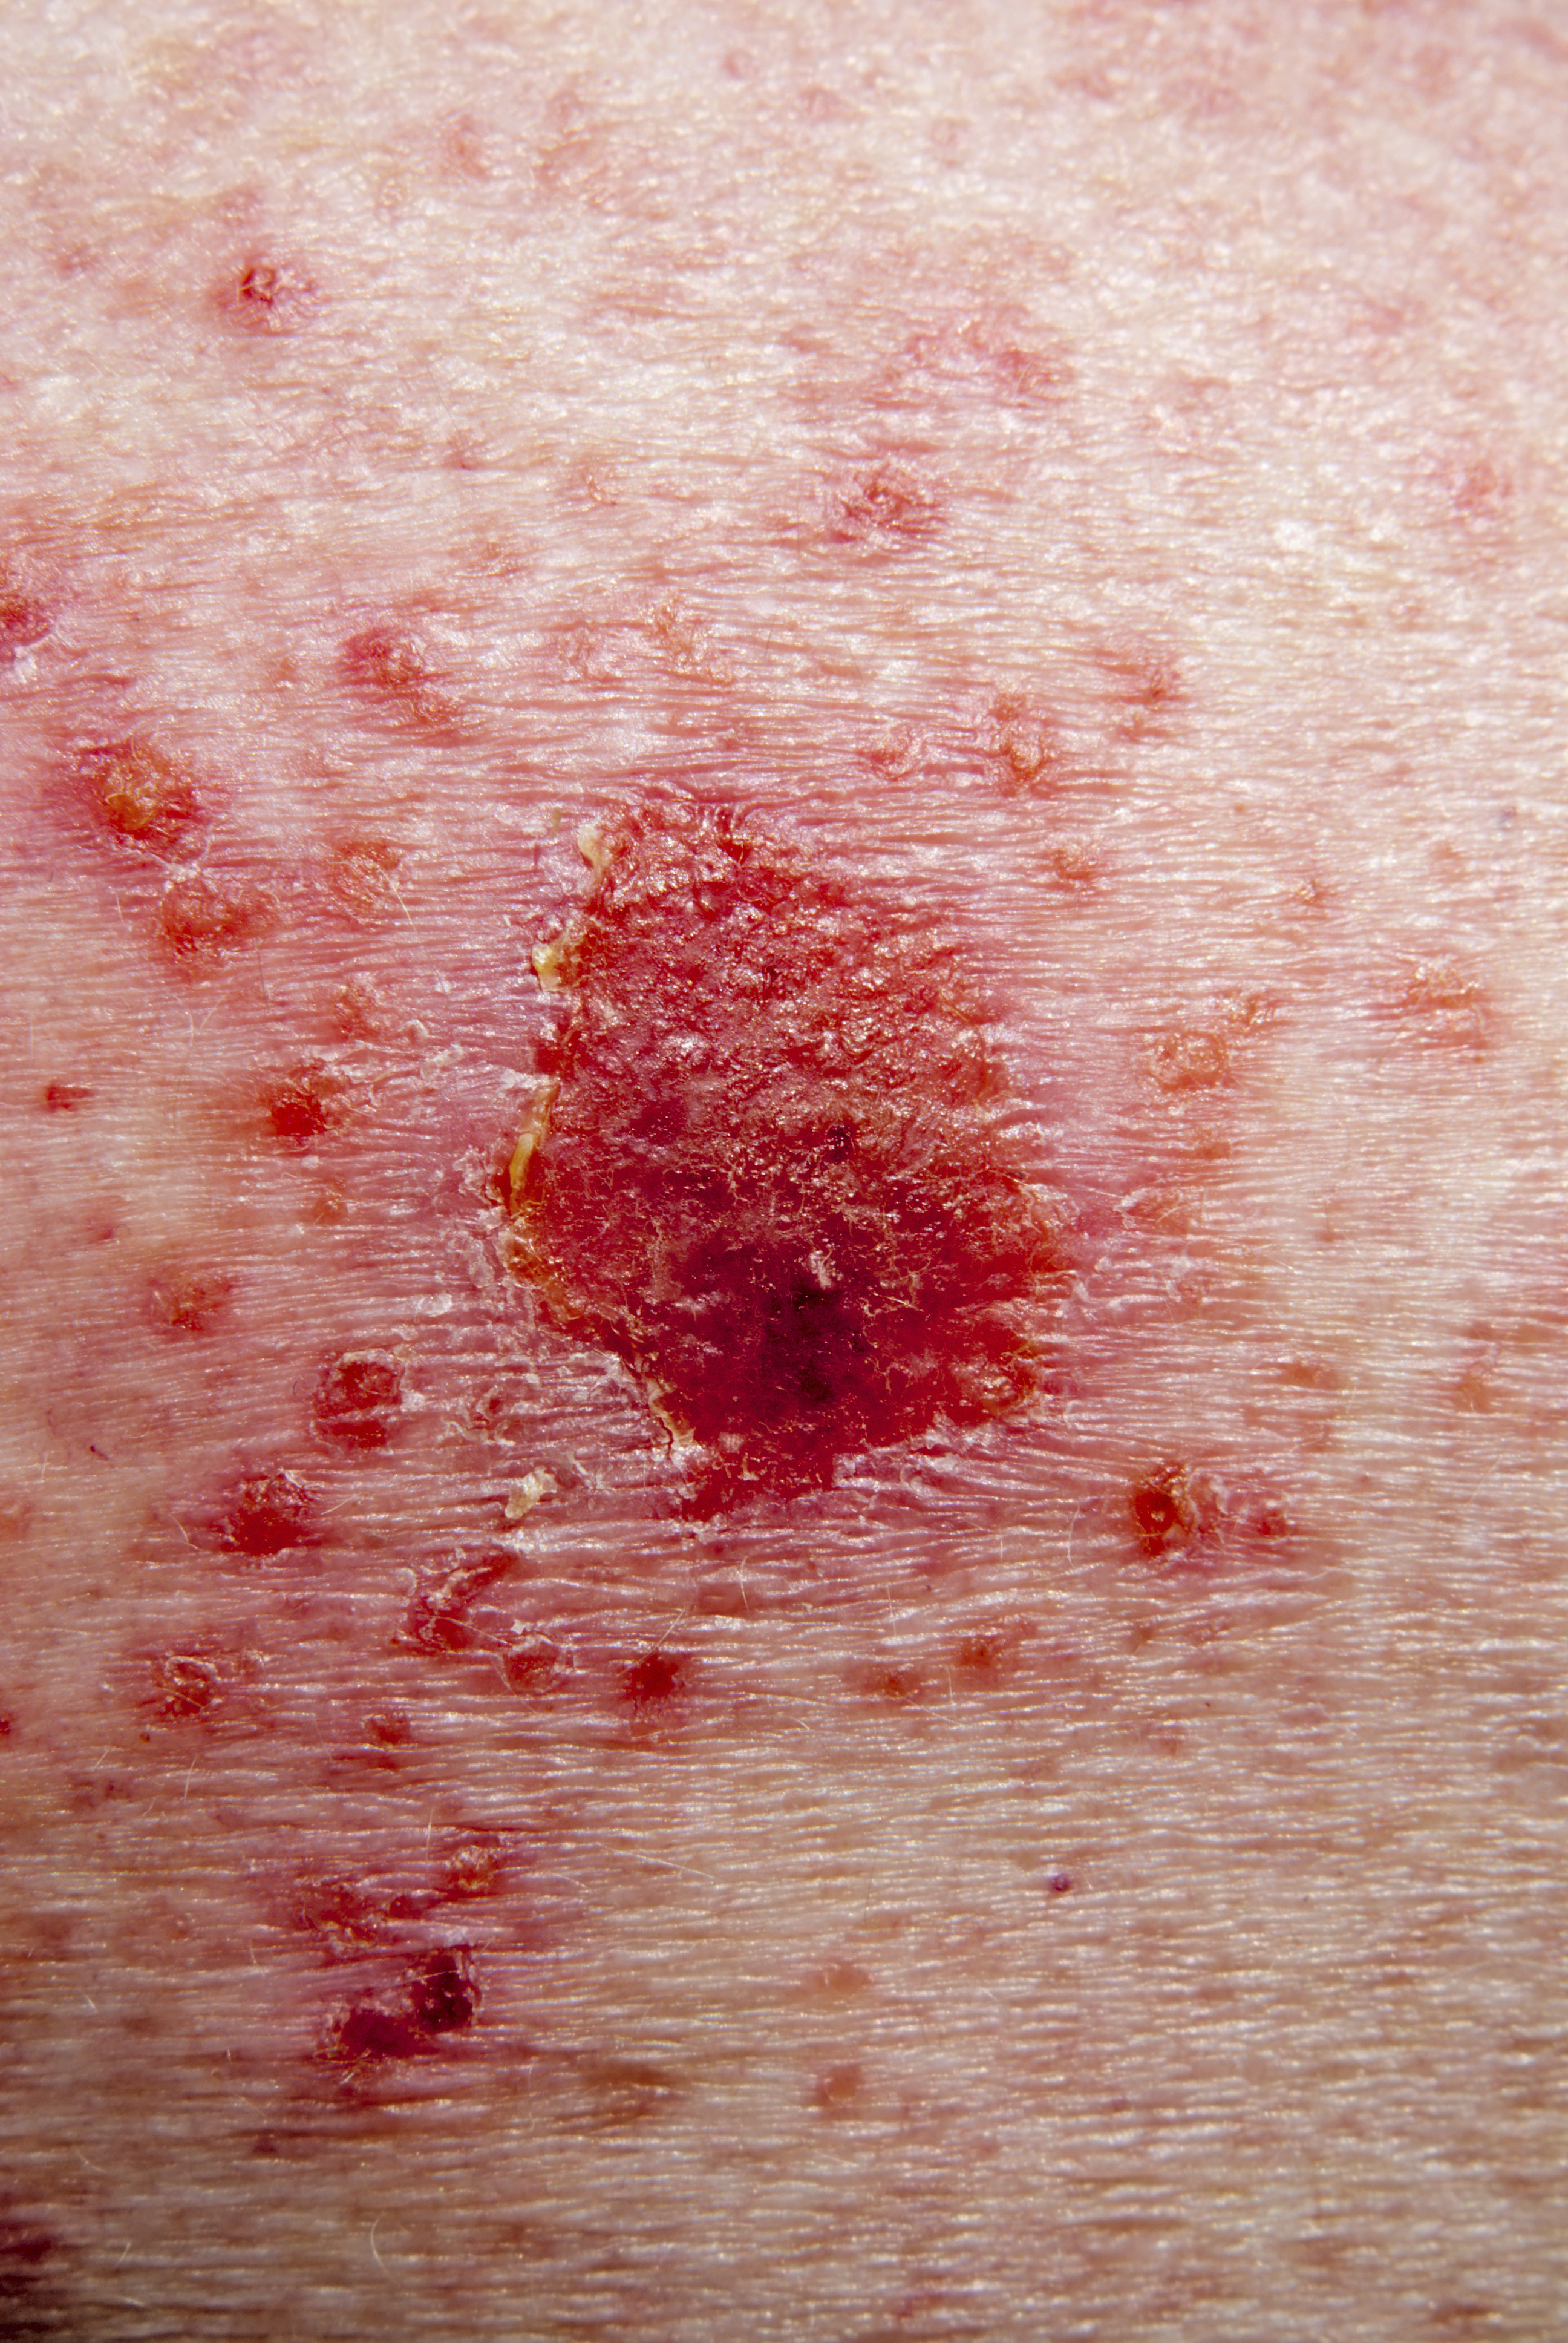 Skin Cancer Early Stage Skin Cancer